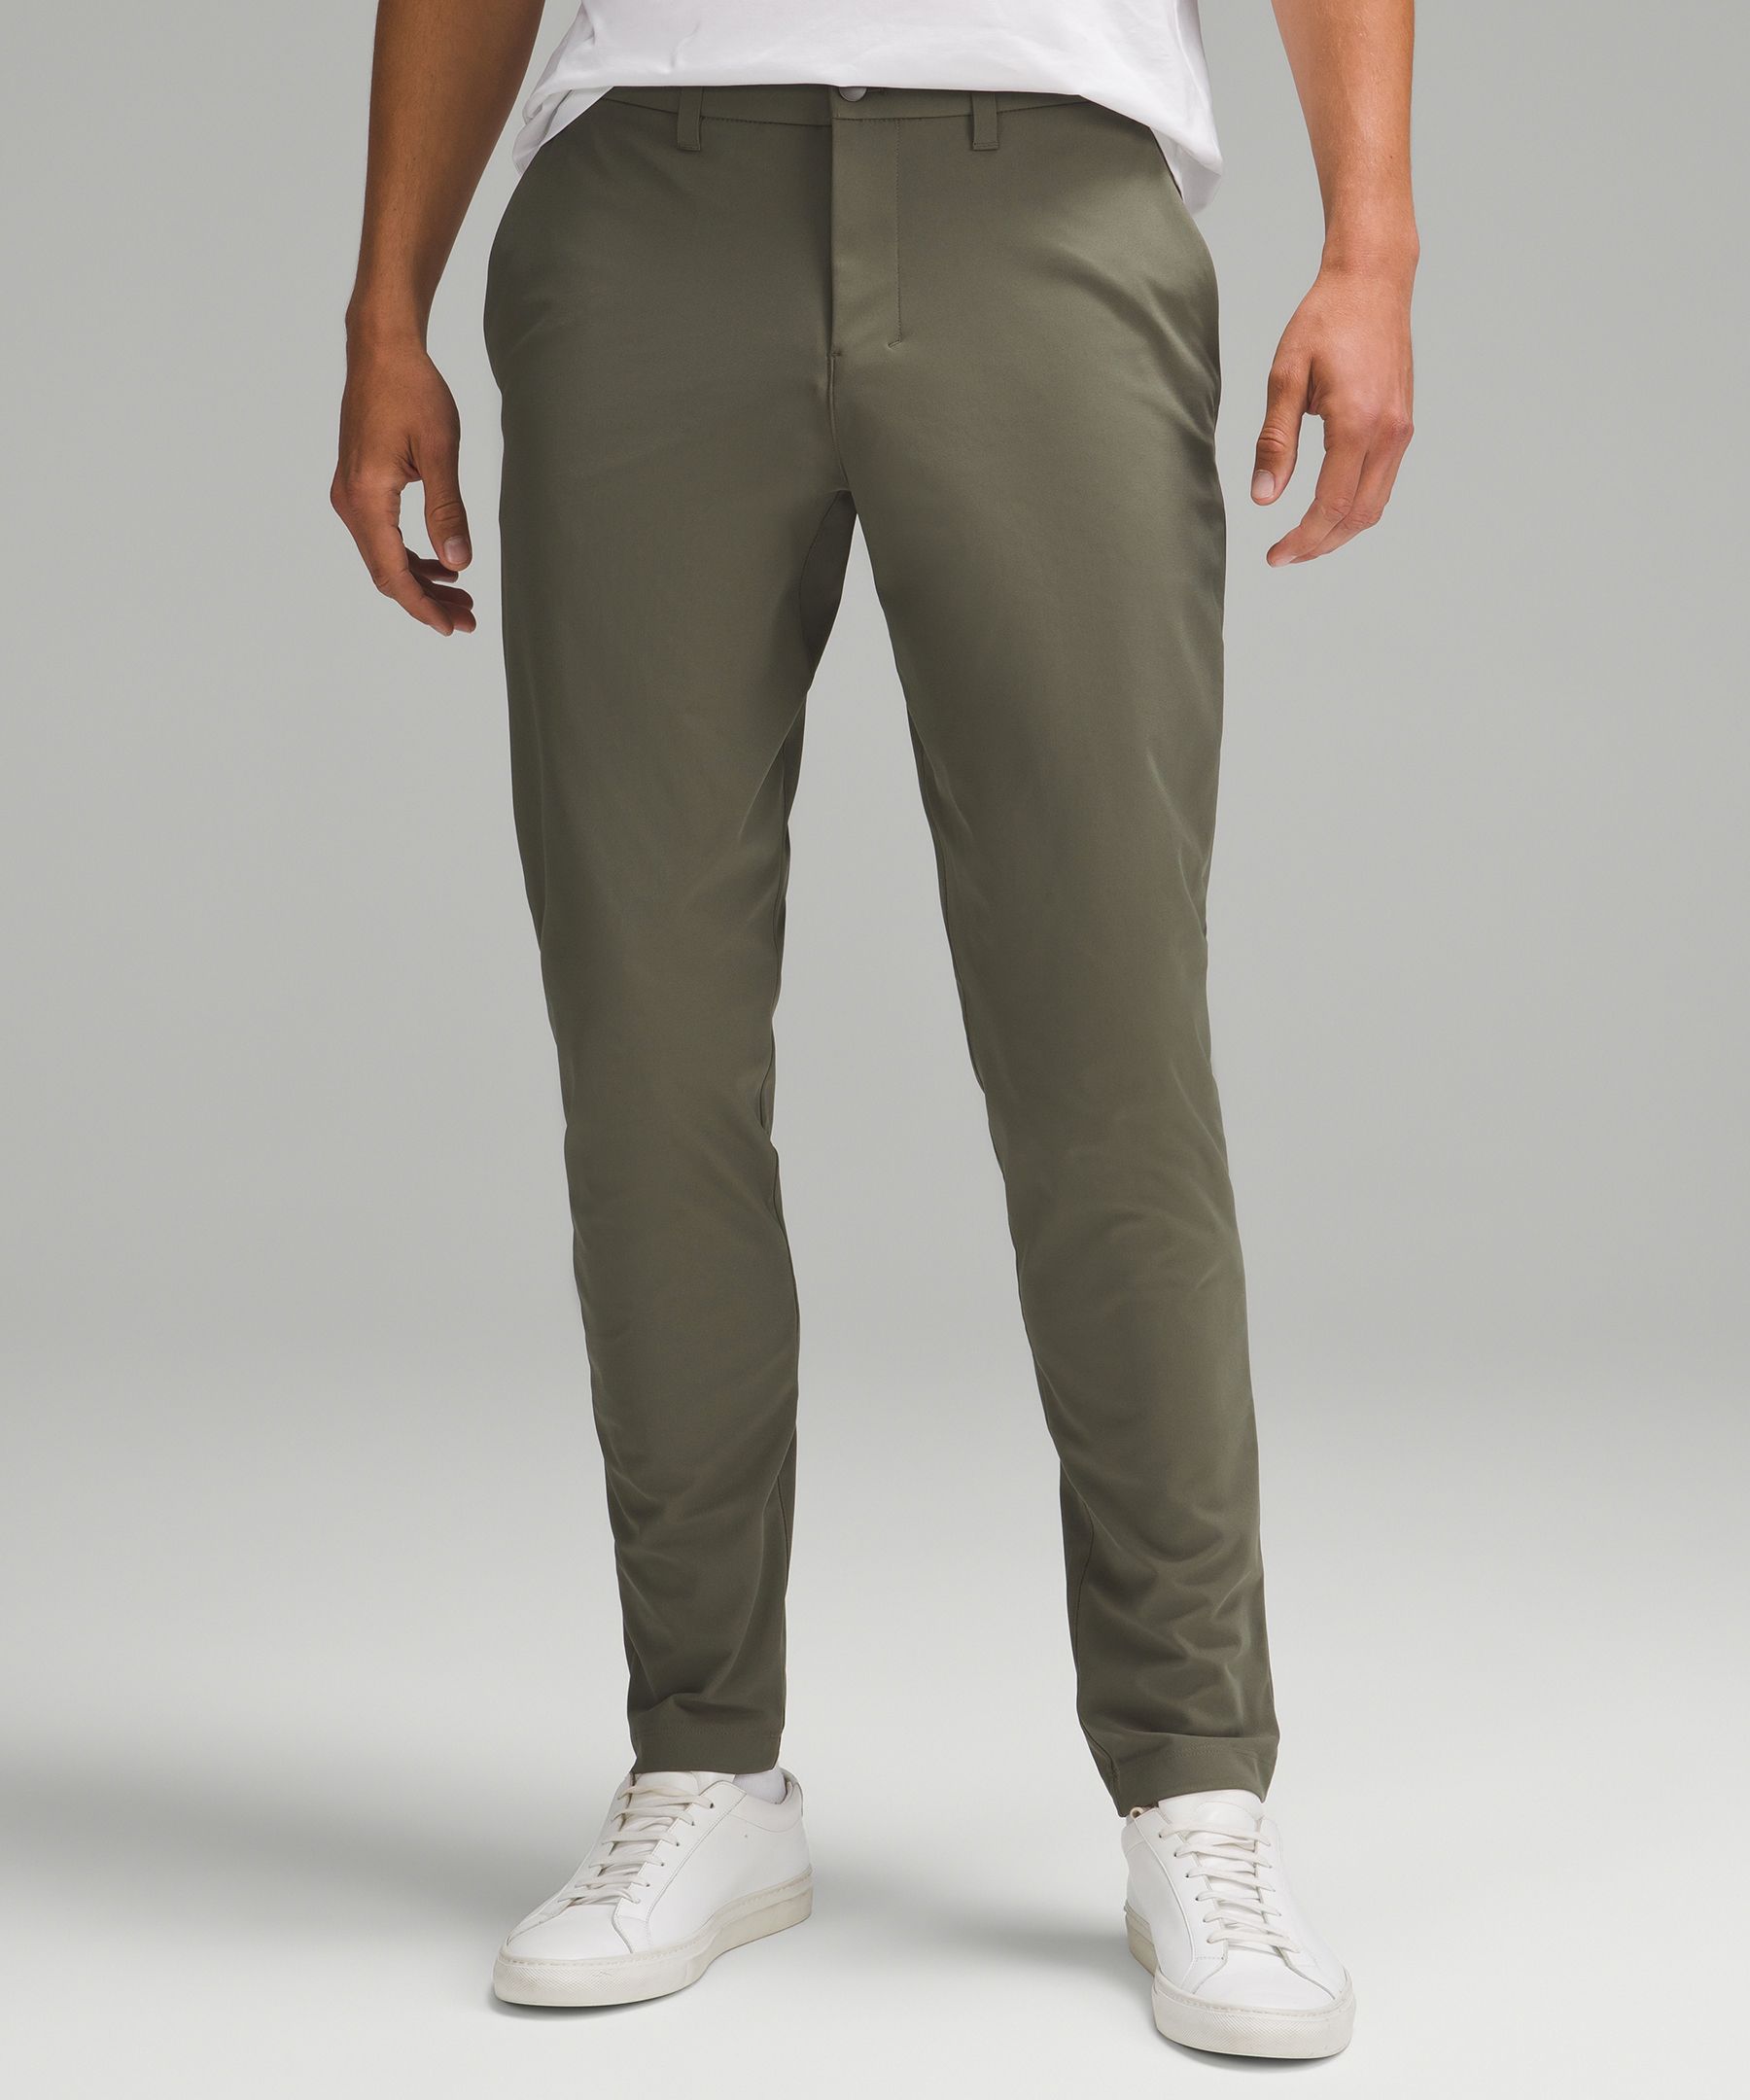 Lululemon ABC Pant: One thing to buy this week